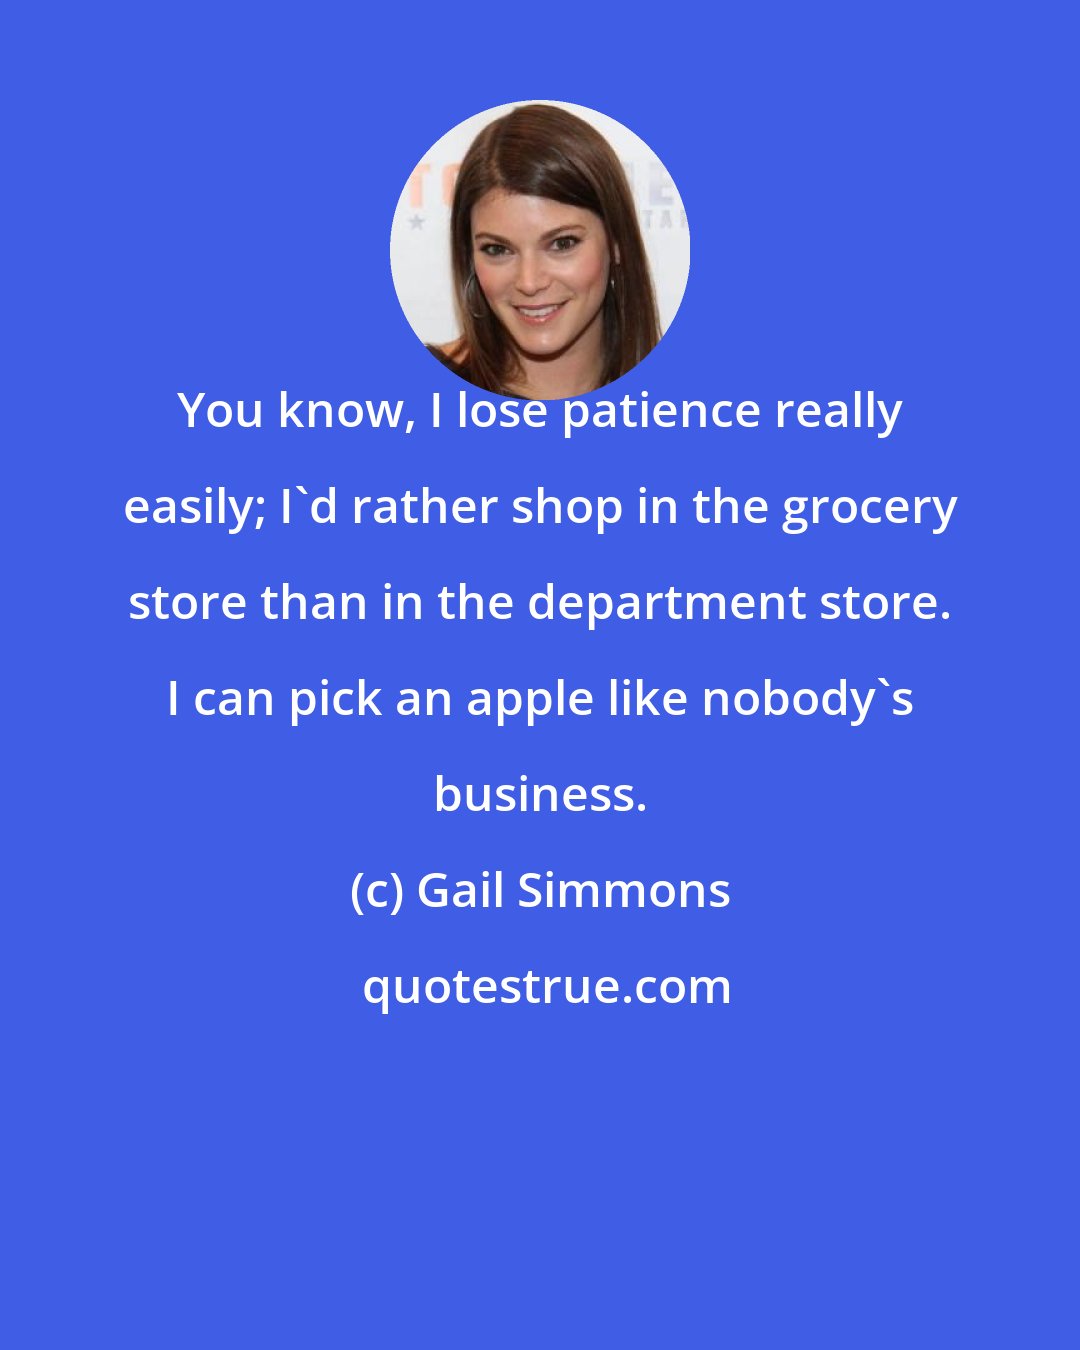 Gail Simmons: You know, I lose patience really easily; I'd rather shop in the grocery store than in the department store. I can pick an apple like nobody's business.